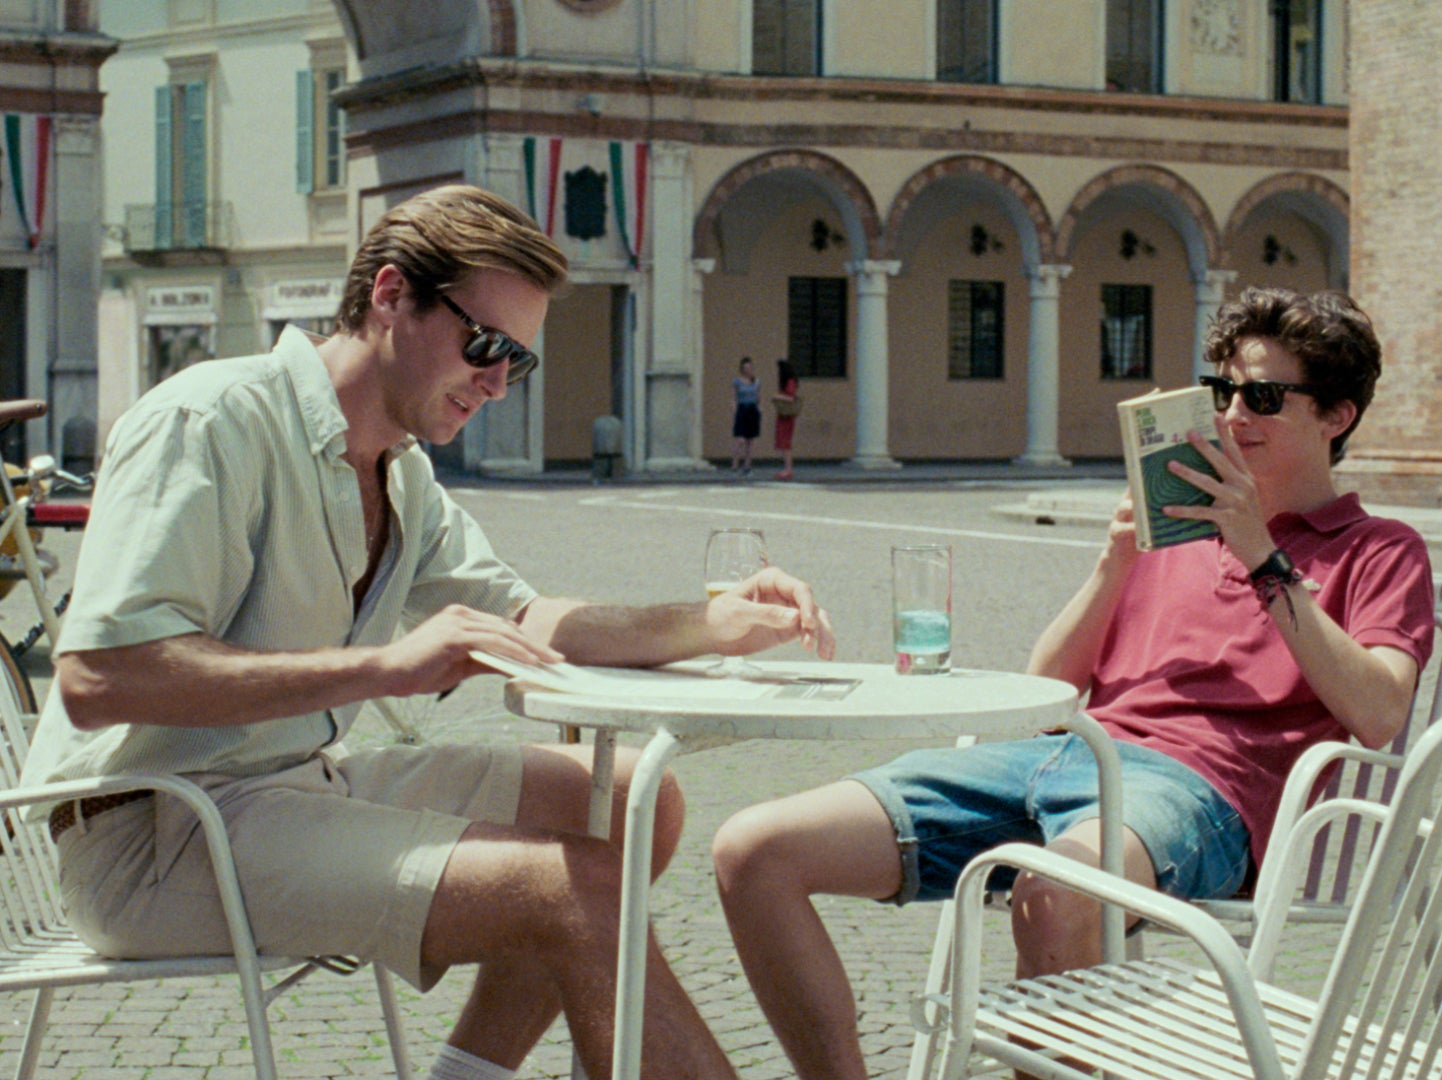 Armie Hammer and Timothee Chalamet in 'Call Me By Your Name'